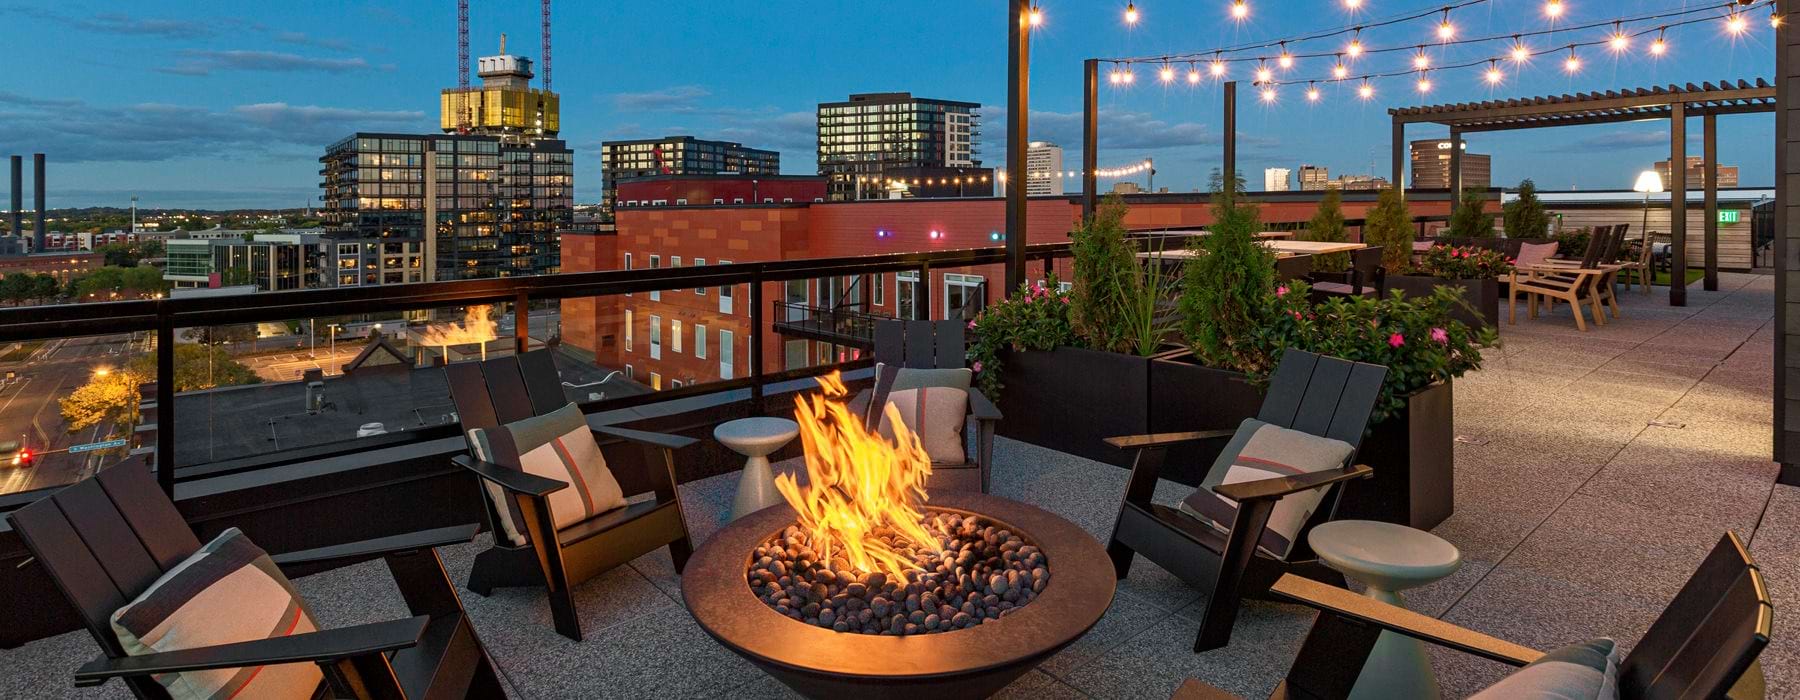 Rooftop firepit and skyline view